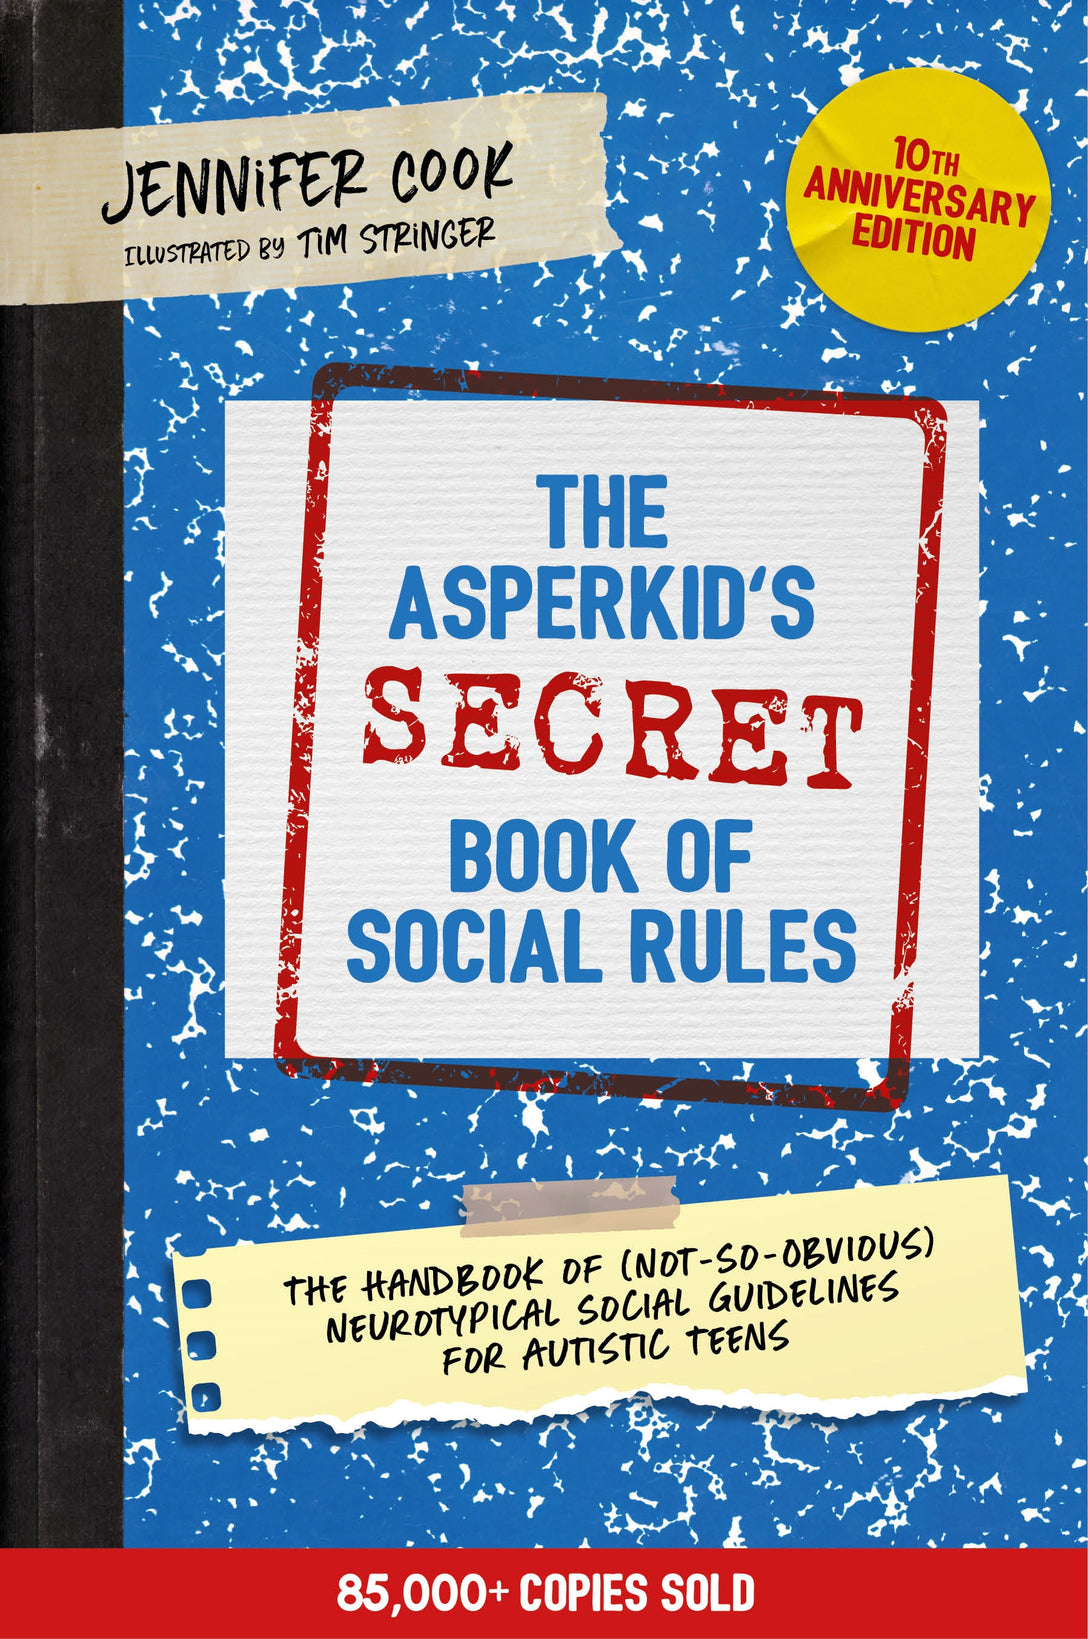 The Asperkid's (Secret) Book of Social Rules, 10th Anniversary Edition by Jennifer Cook